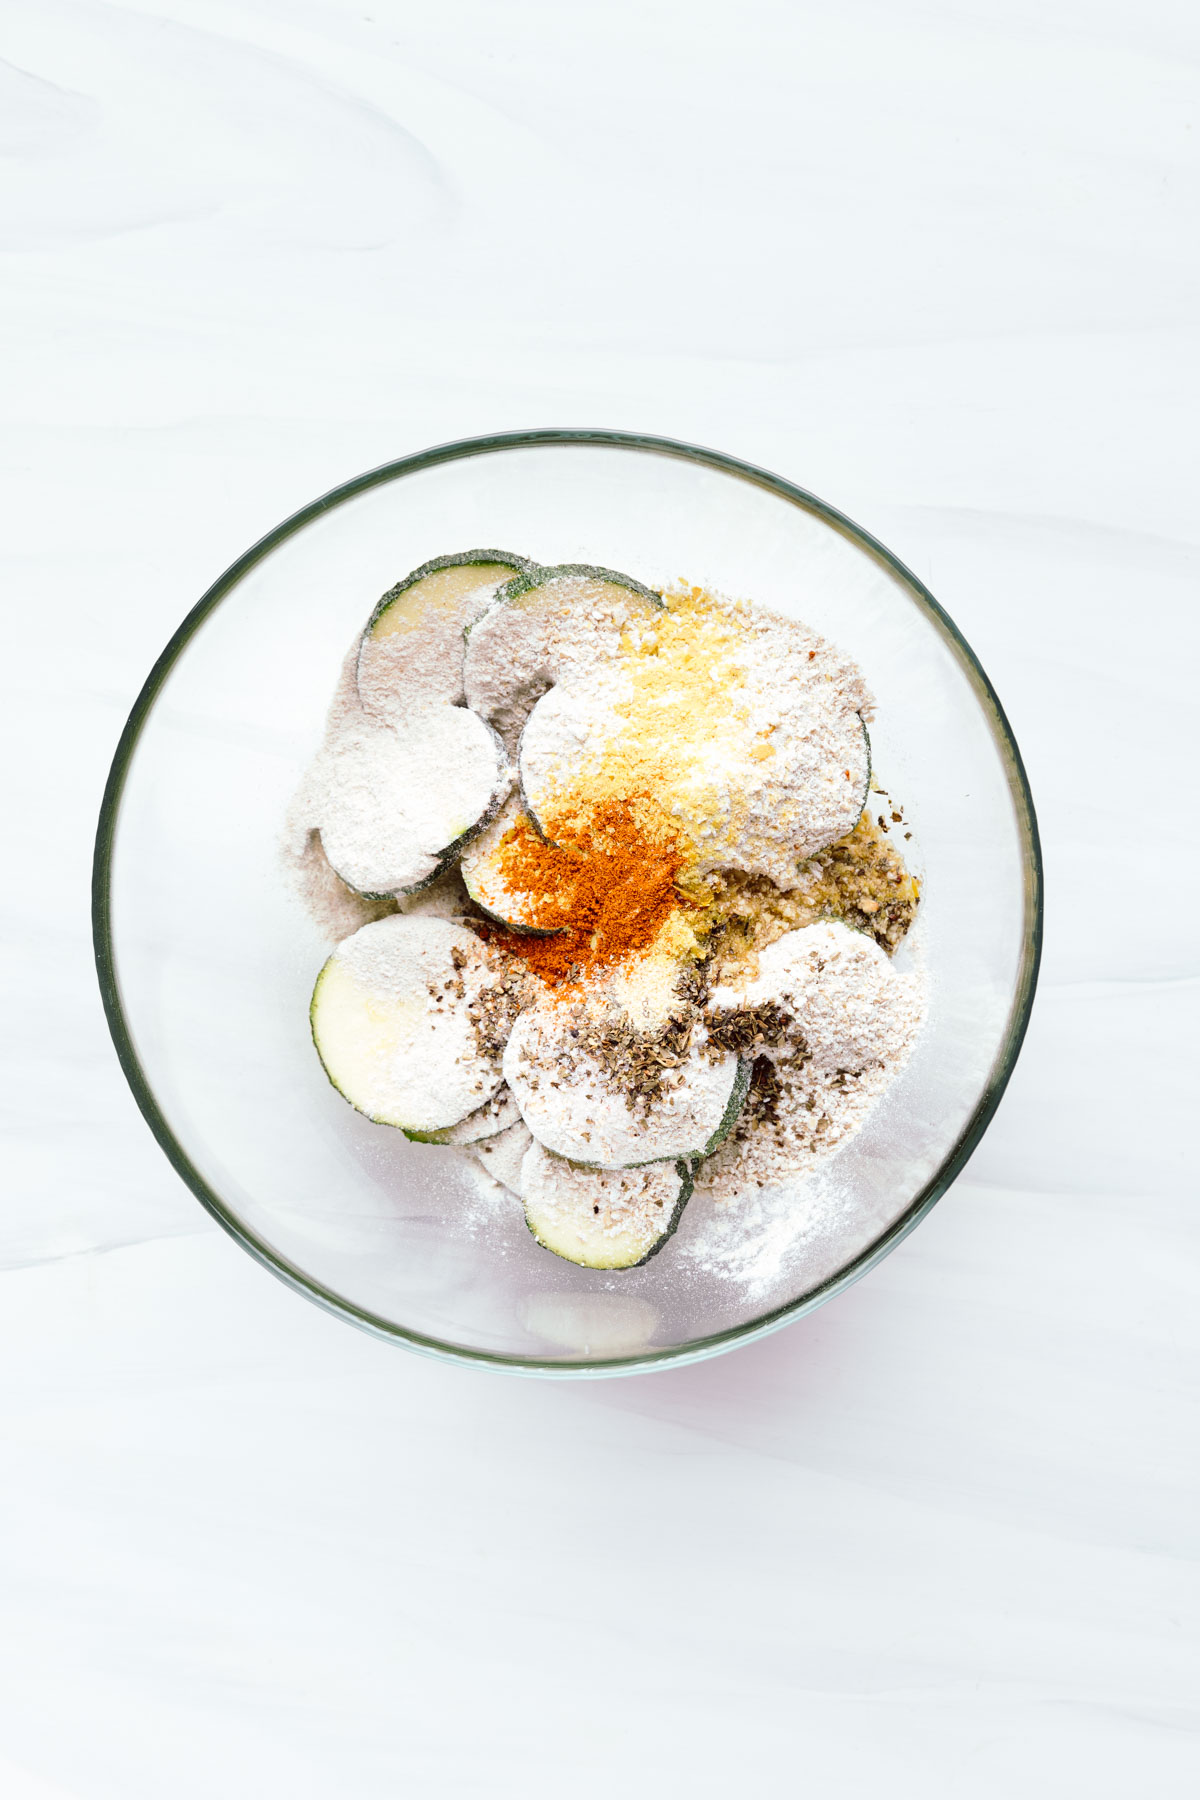 Zucchini slices in a glass bowl with flour and paprika powder on top on a white backdrop